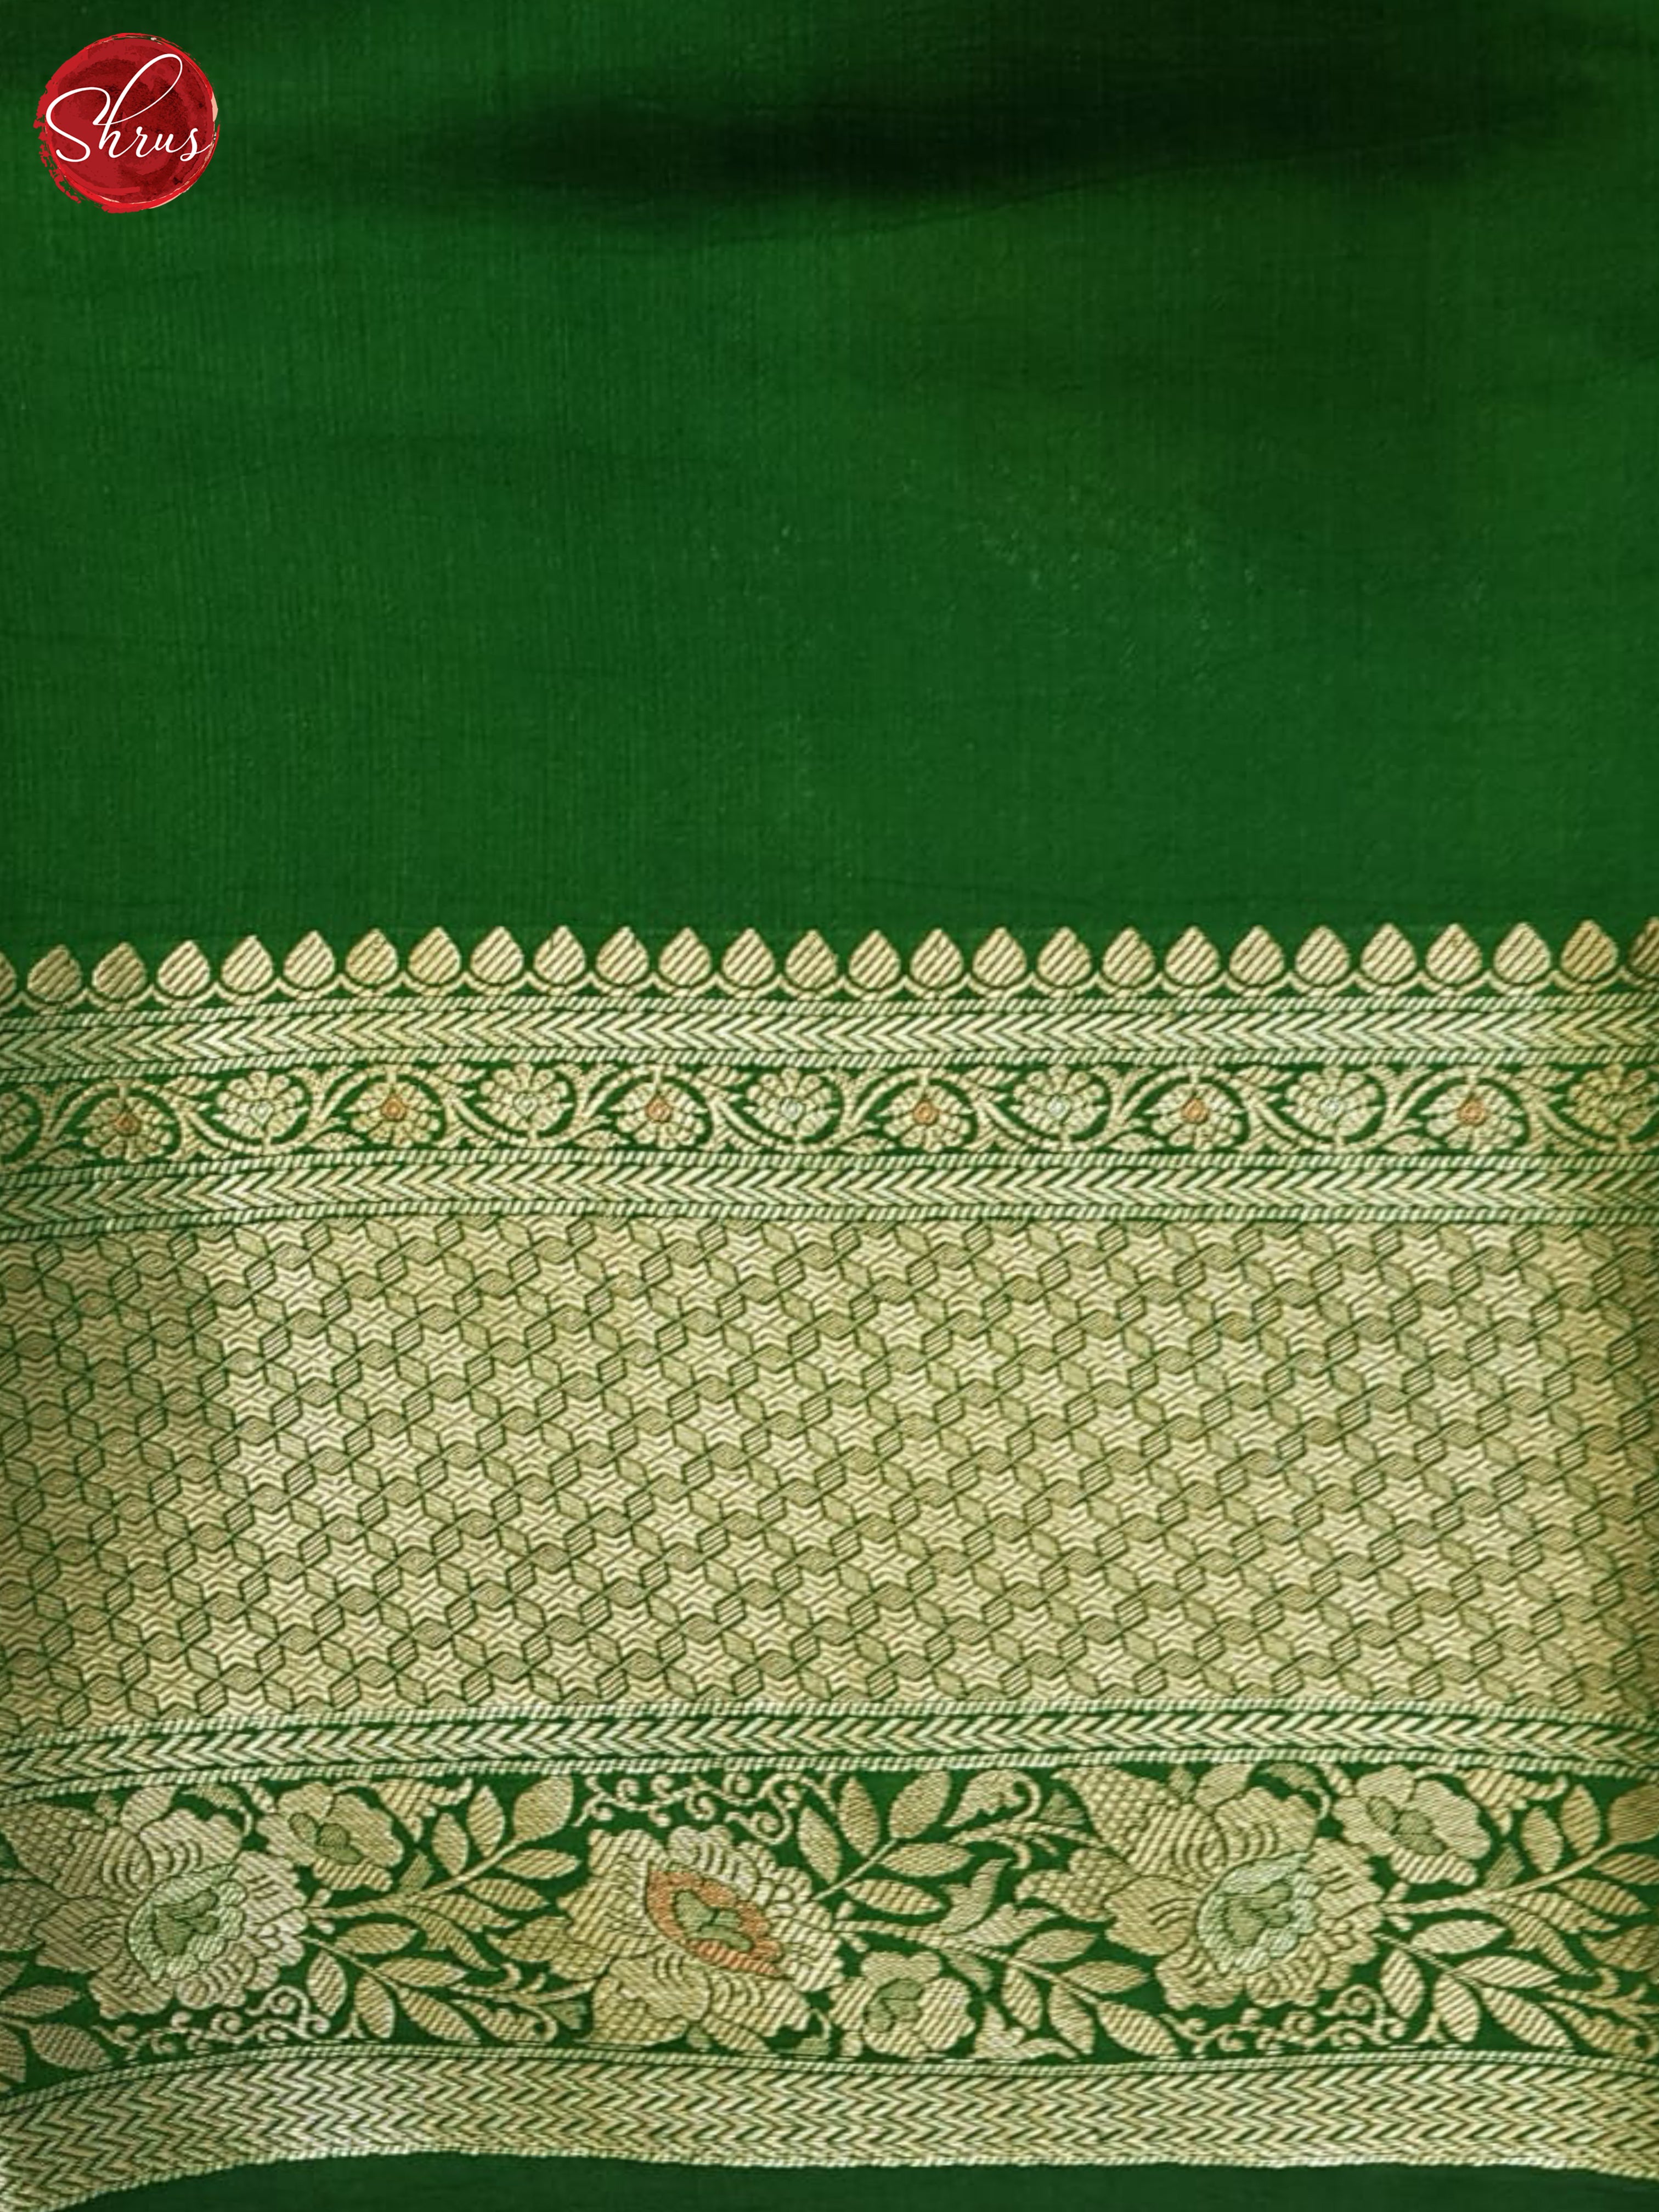 Red And Green- Tussar Saree - Shop on ShrusEternity.com